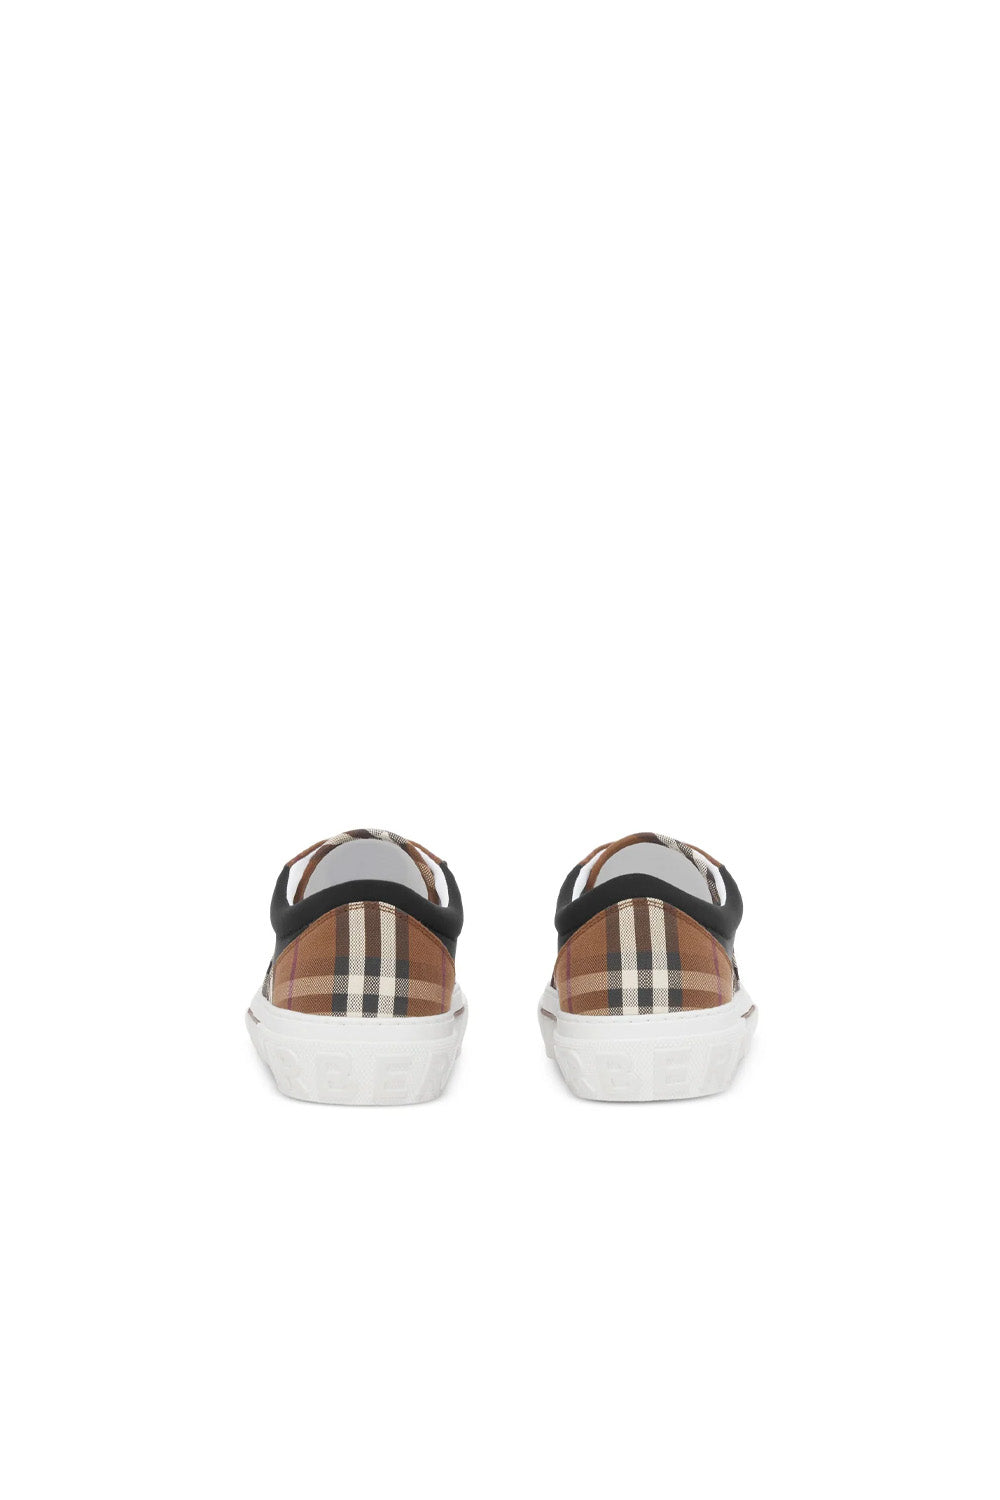 Burberry Vintage Check patchwork sneakers